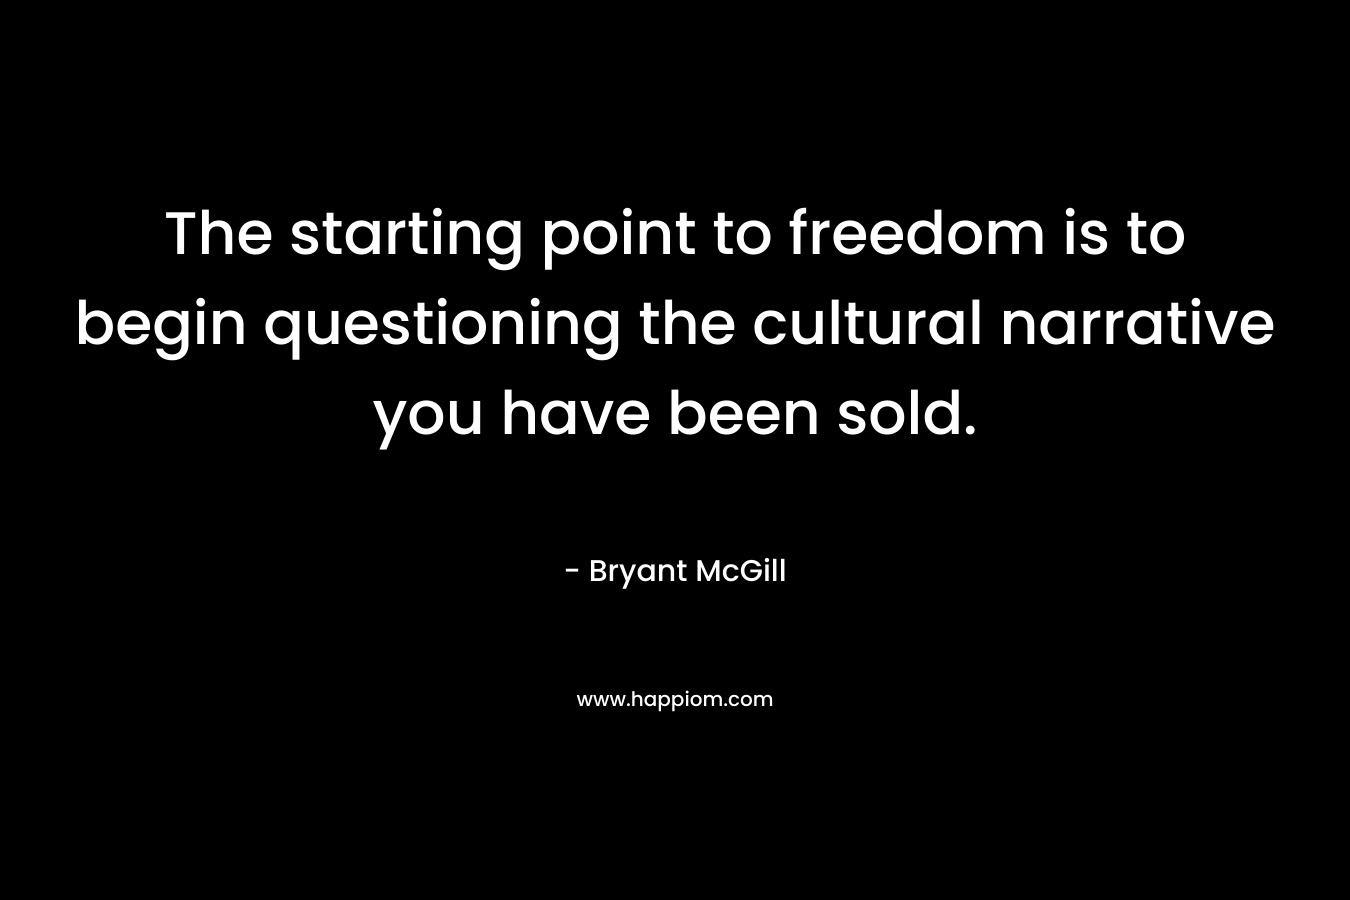 The starting point to freedom is to begin questioning the cultural narrative you have been sold. – Bryant McGill